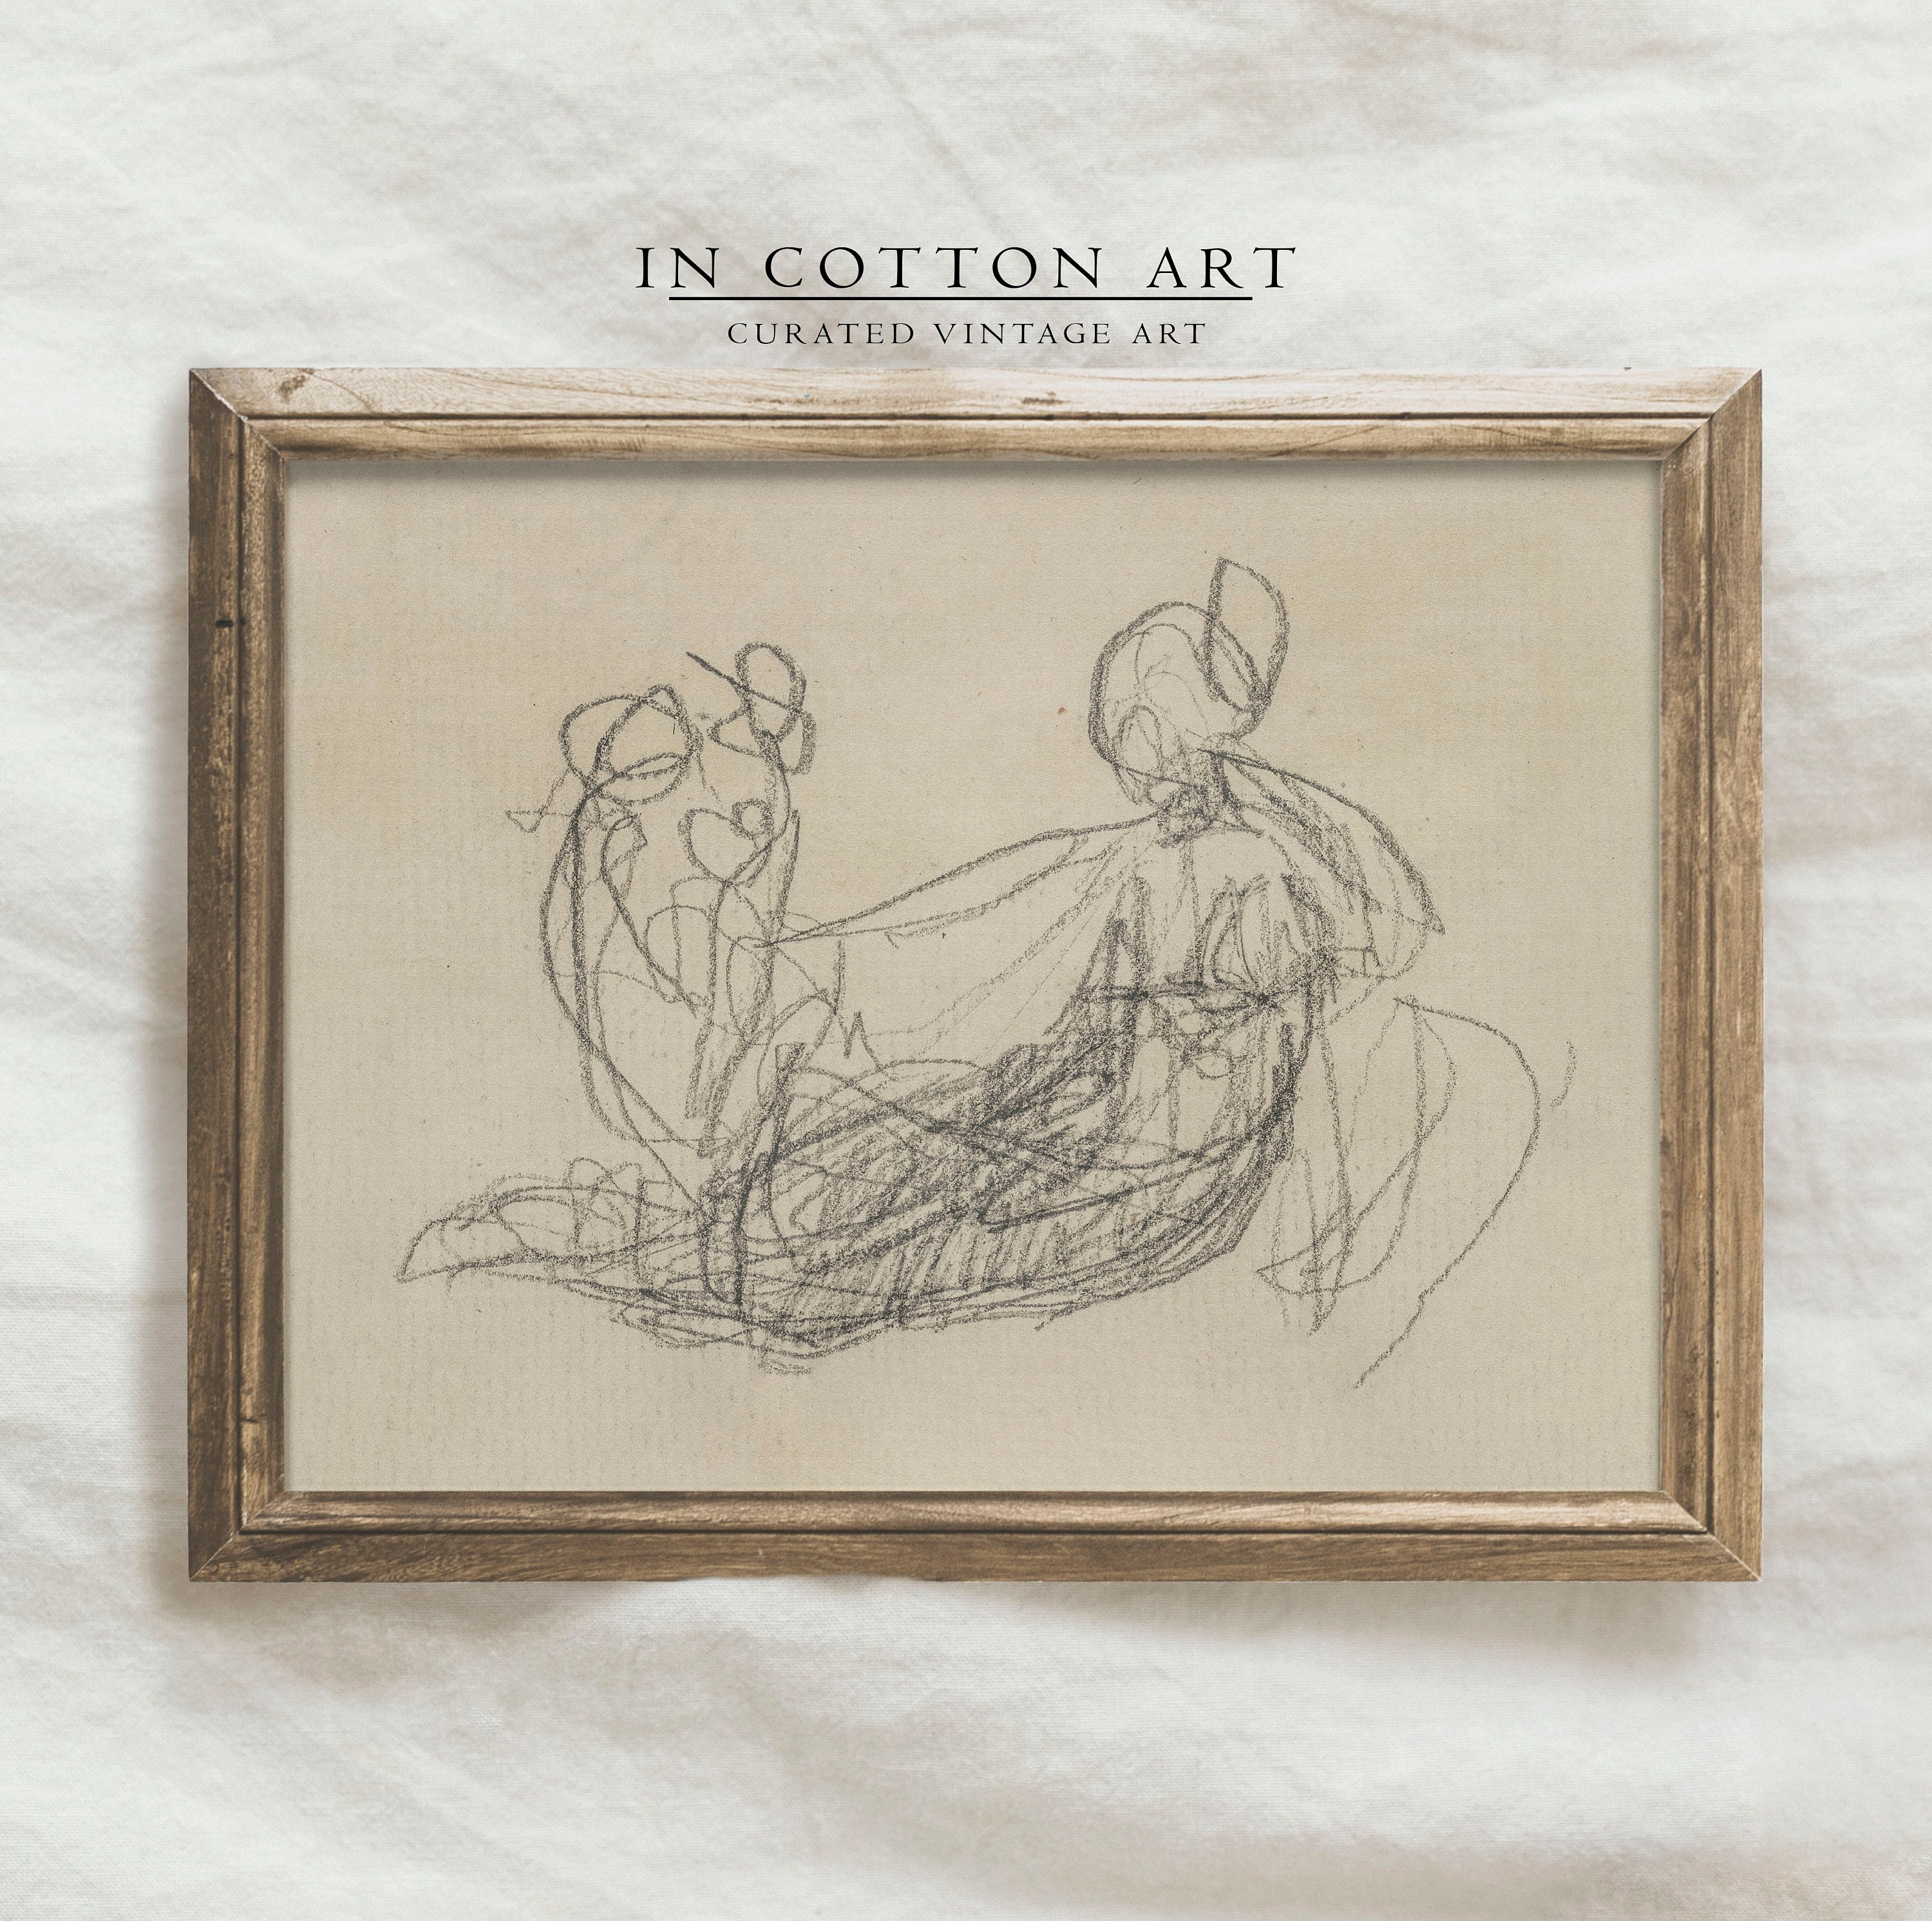 Figure drawing in pencil stock illustration. Illustration of female -  48258149